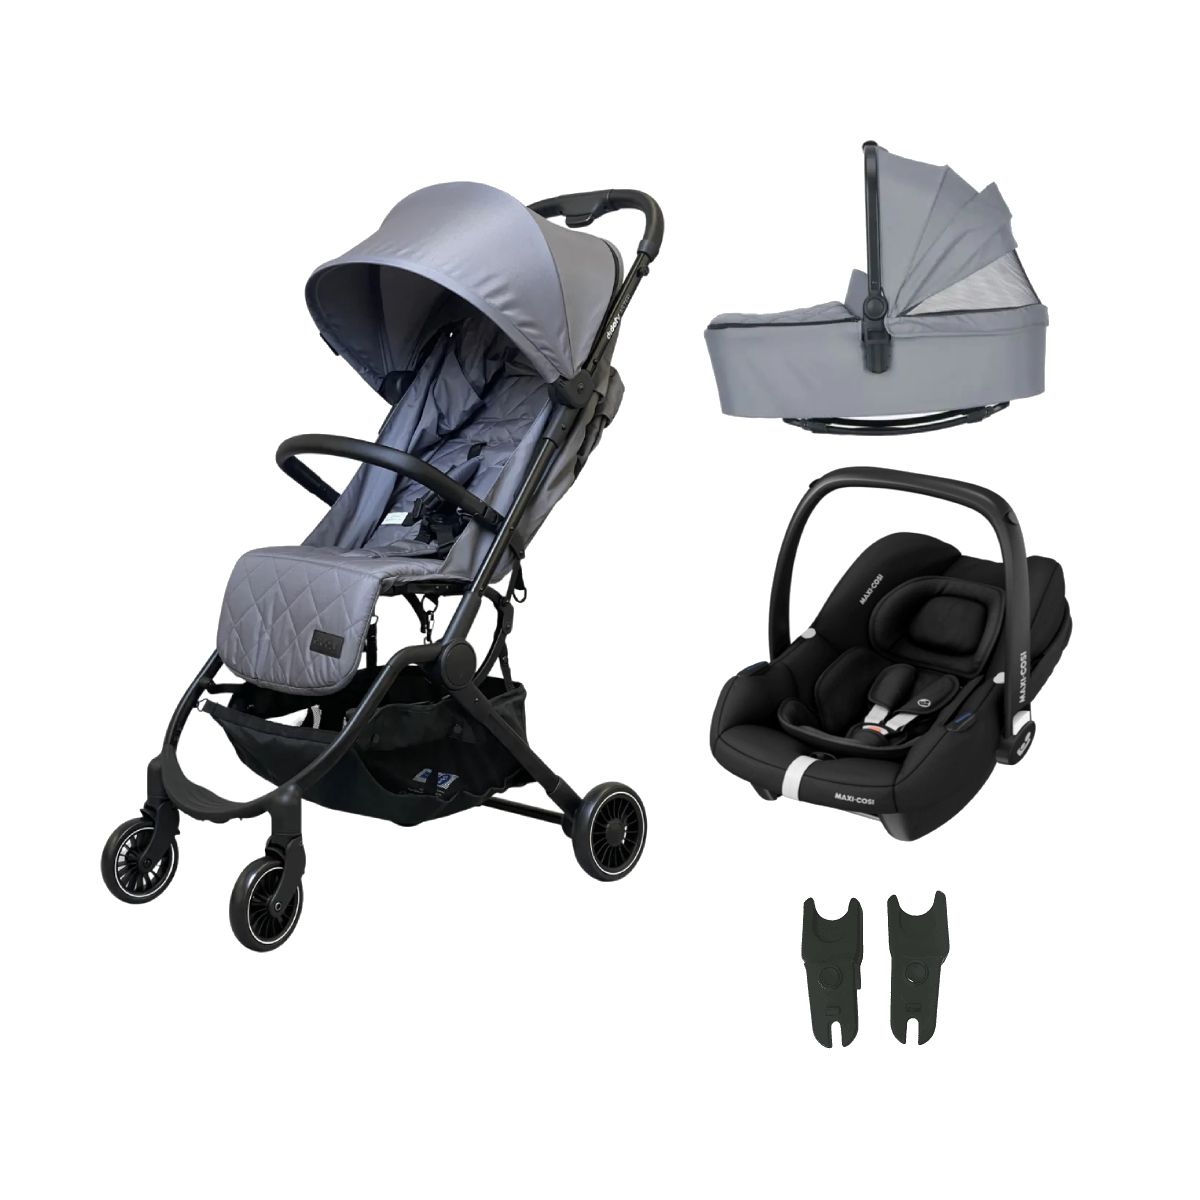 Didofy Aster 2 3in1 Travel System